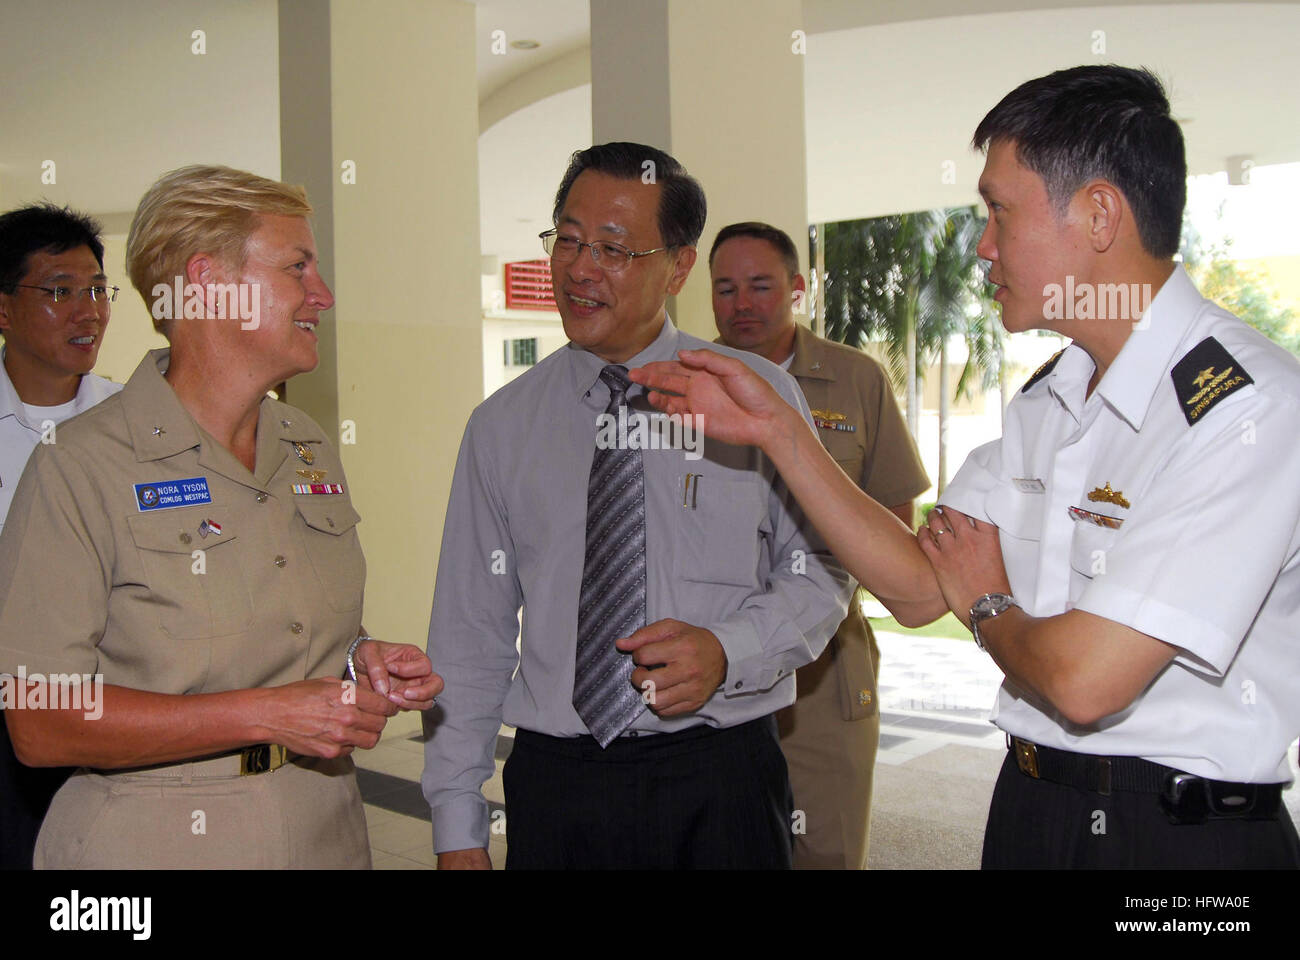 080701-N-7095C-013 SINGAPORE (July 1, 2008) Rear Adm. Nora W. Tyson, left, commander of Logistics Group Western Pacific, Lim Yeon Khee, Movement for the Intellectually Disabled of Singapore (MINDS) public relations official and public education committee chairman, and Rear Adm. Ng Chee Peng, fleet commander for the Singapore Armed Forces Navy, talk during a visit to MINDS for a community relations project. Service members from the U.S. and Singapore are participating in the project as a part of Cooperation Afloat Readiness and Training (CARAT) 2008. CARAT is an annual series of bilateral train Stock Photo